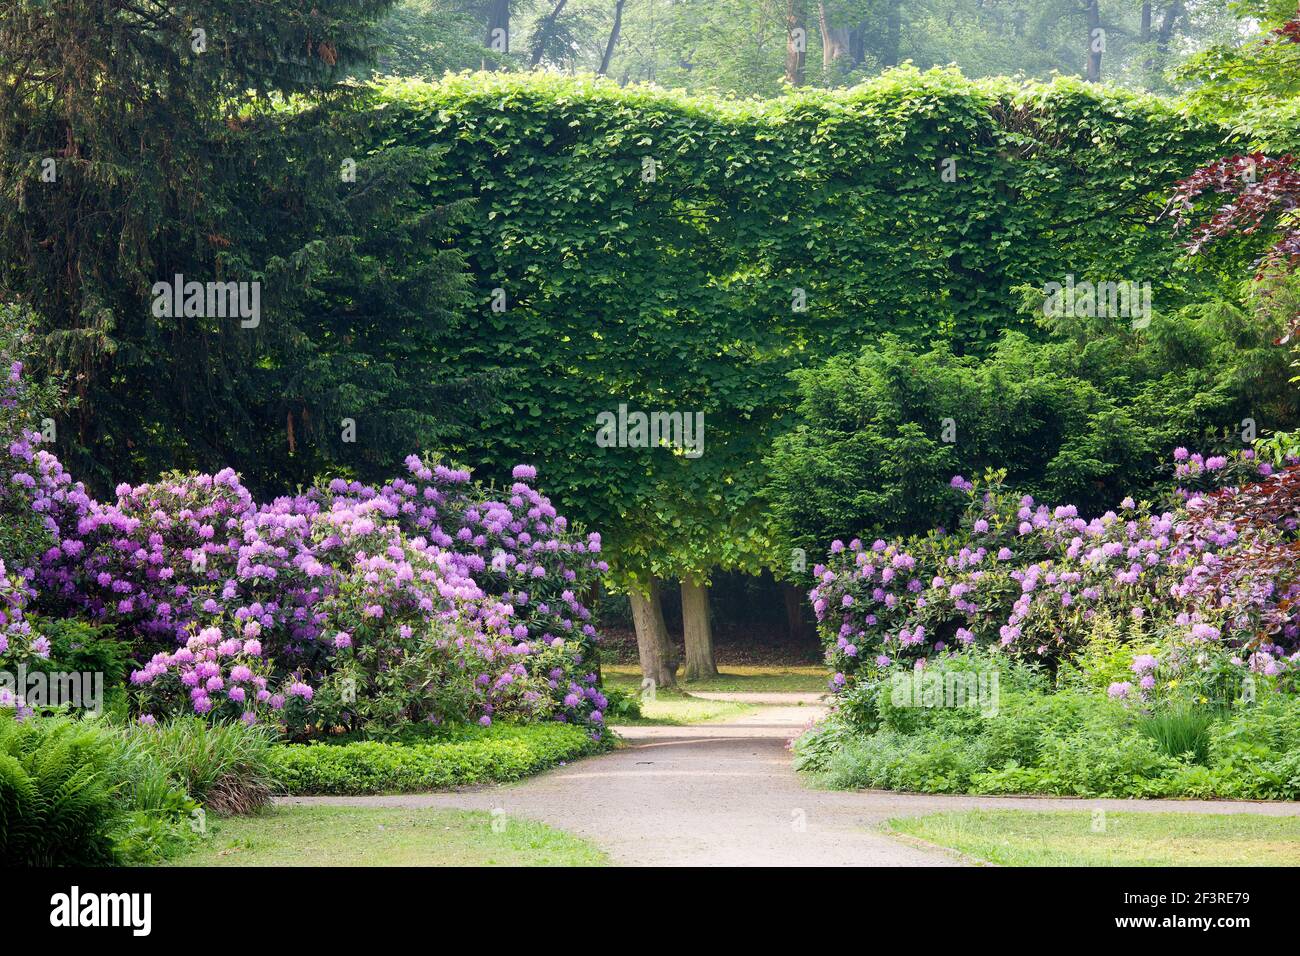 Baroque park with tall hedge and rhododendron bushes, Franzosischer Garden, Dusseldorf, Germany Stock Photo